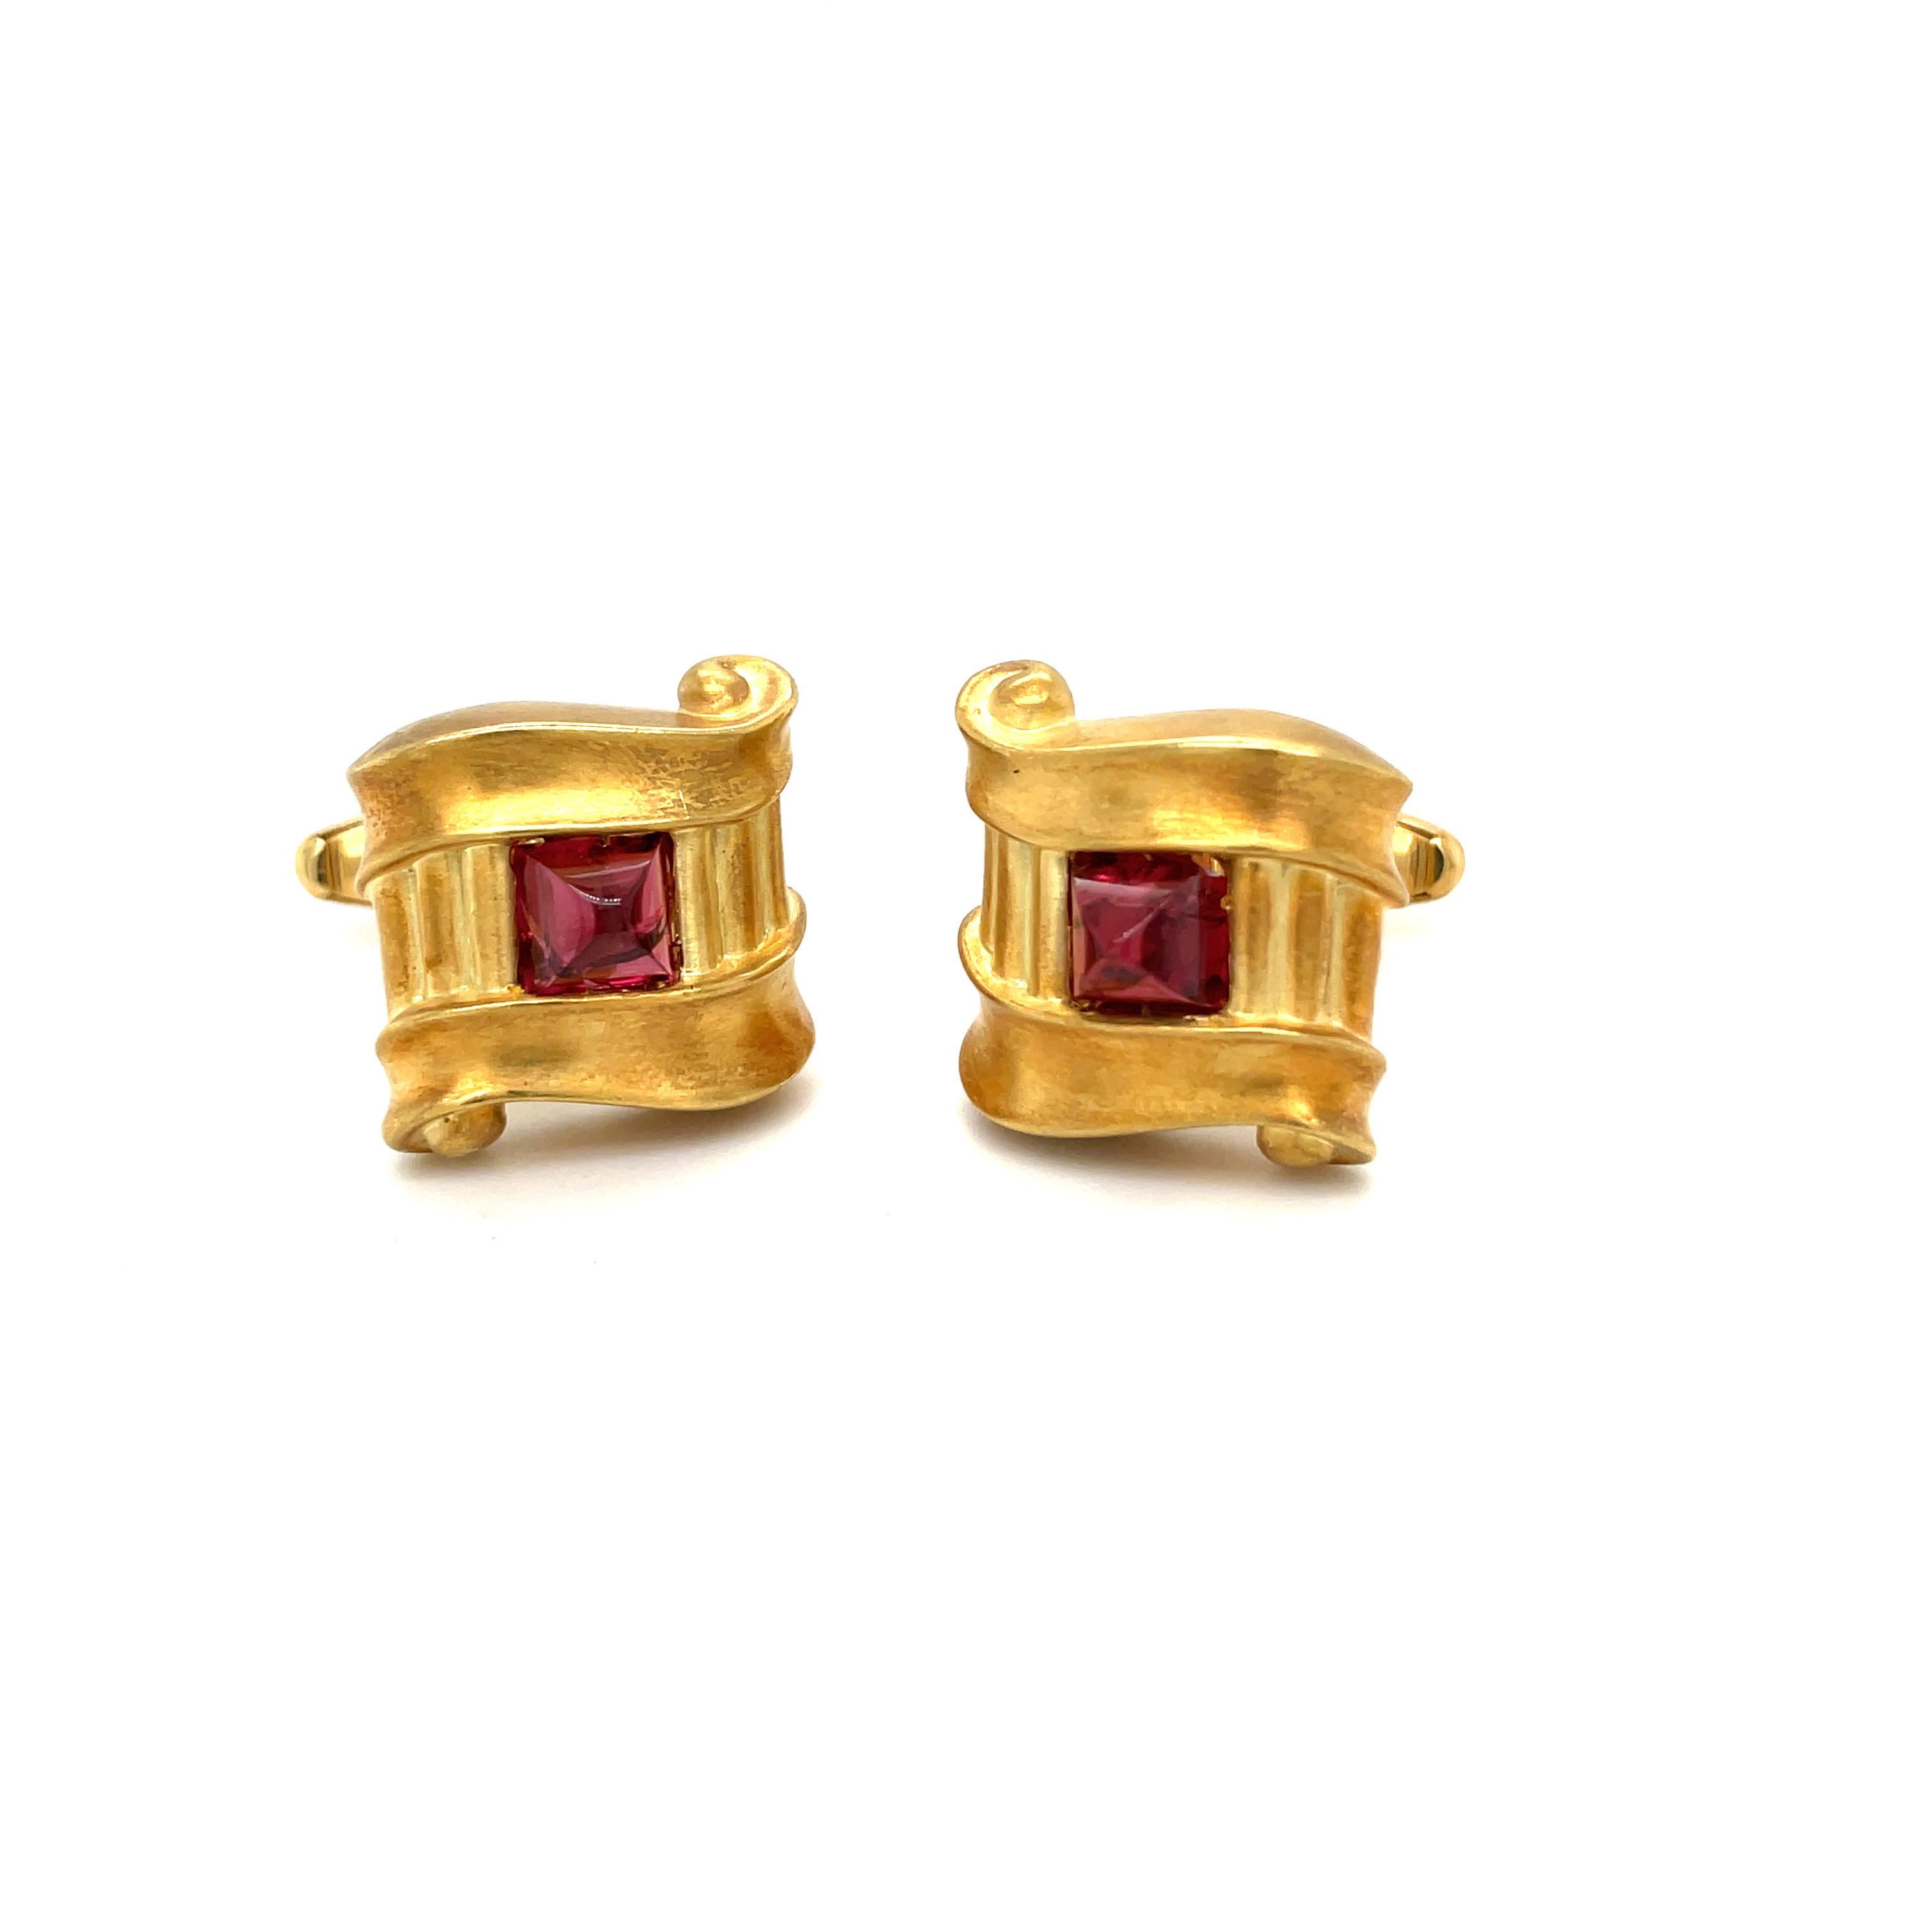 Designed in an 18 karat yellow gold satin finish, these cuff links have rhodolite cabochon centers. The  bar style cuff links measure approximately 3/4